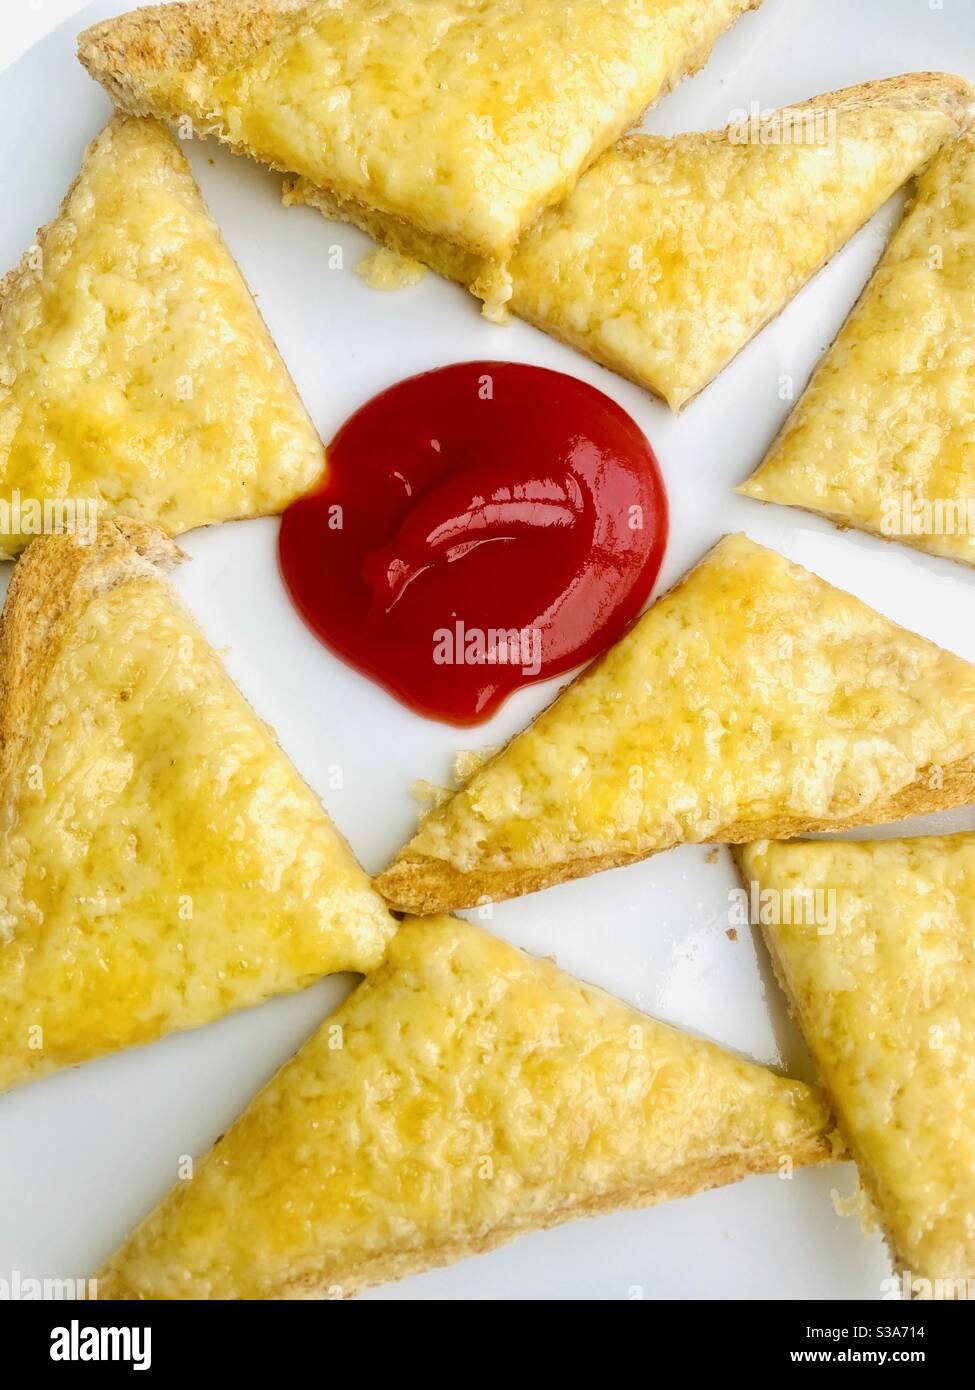 Cheese on toast with a dollop of tomato sauce Stock Photo